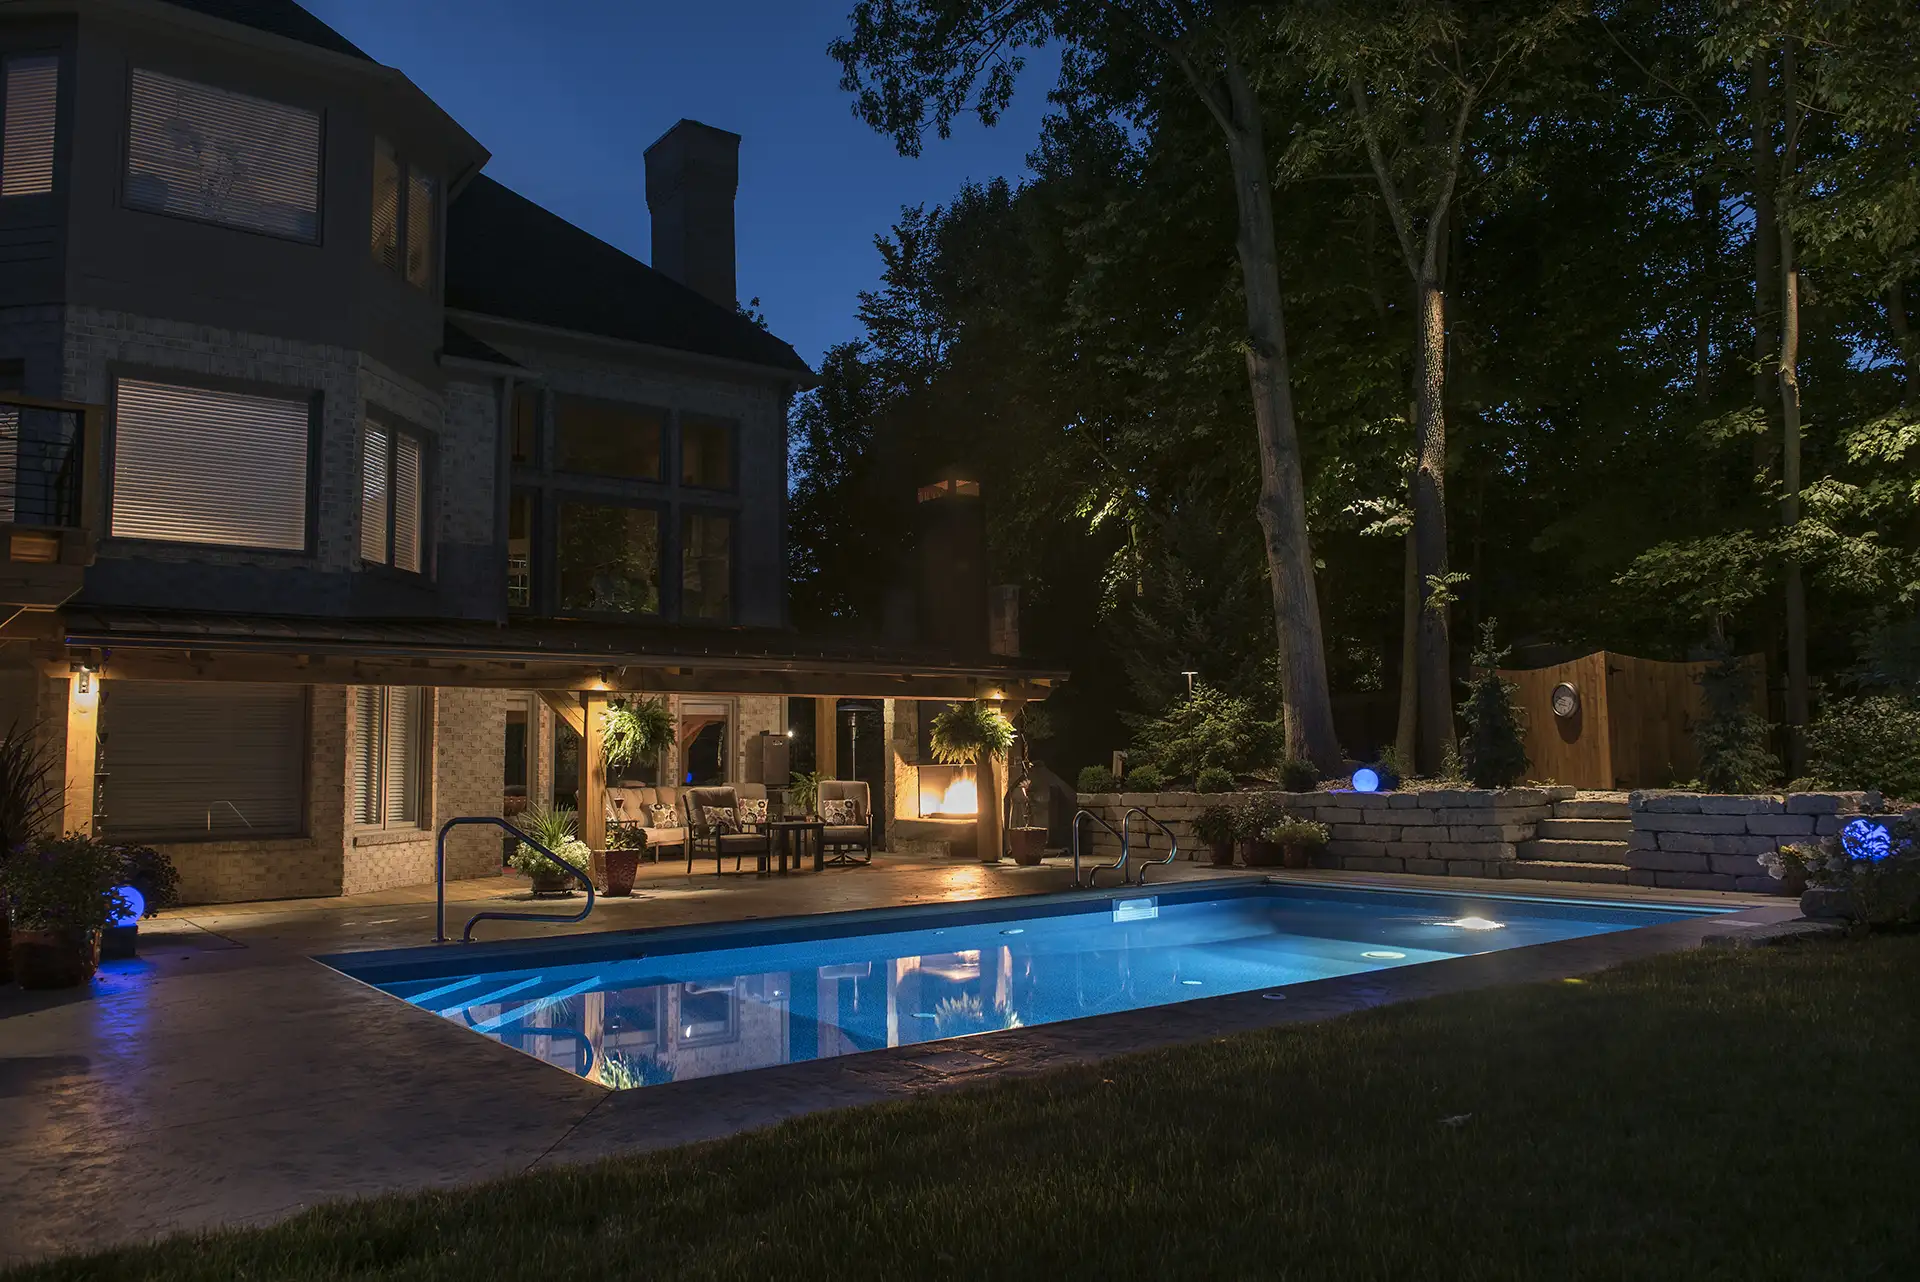 Fuson residence image 4 pool seating area patio Lighthouse Outdoor Lighting and Audio Delaware